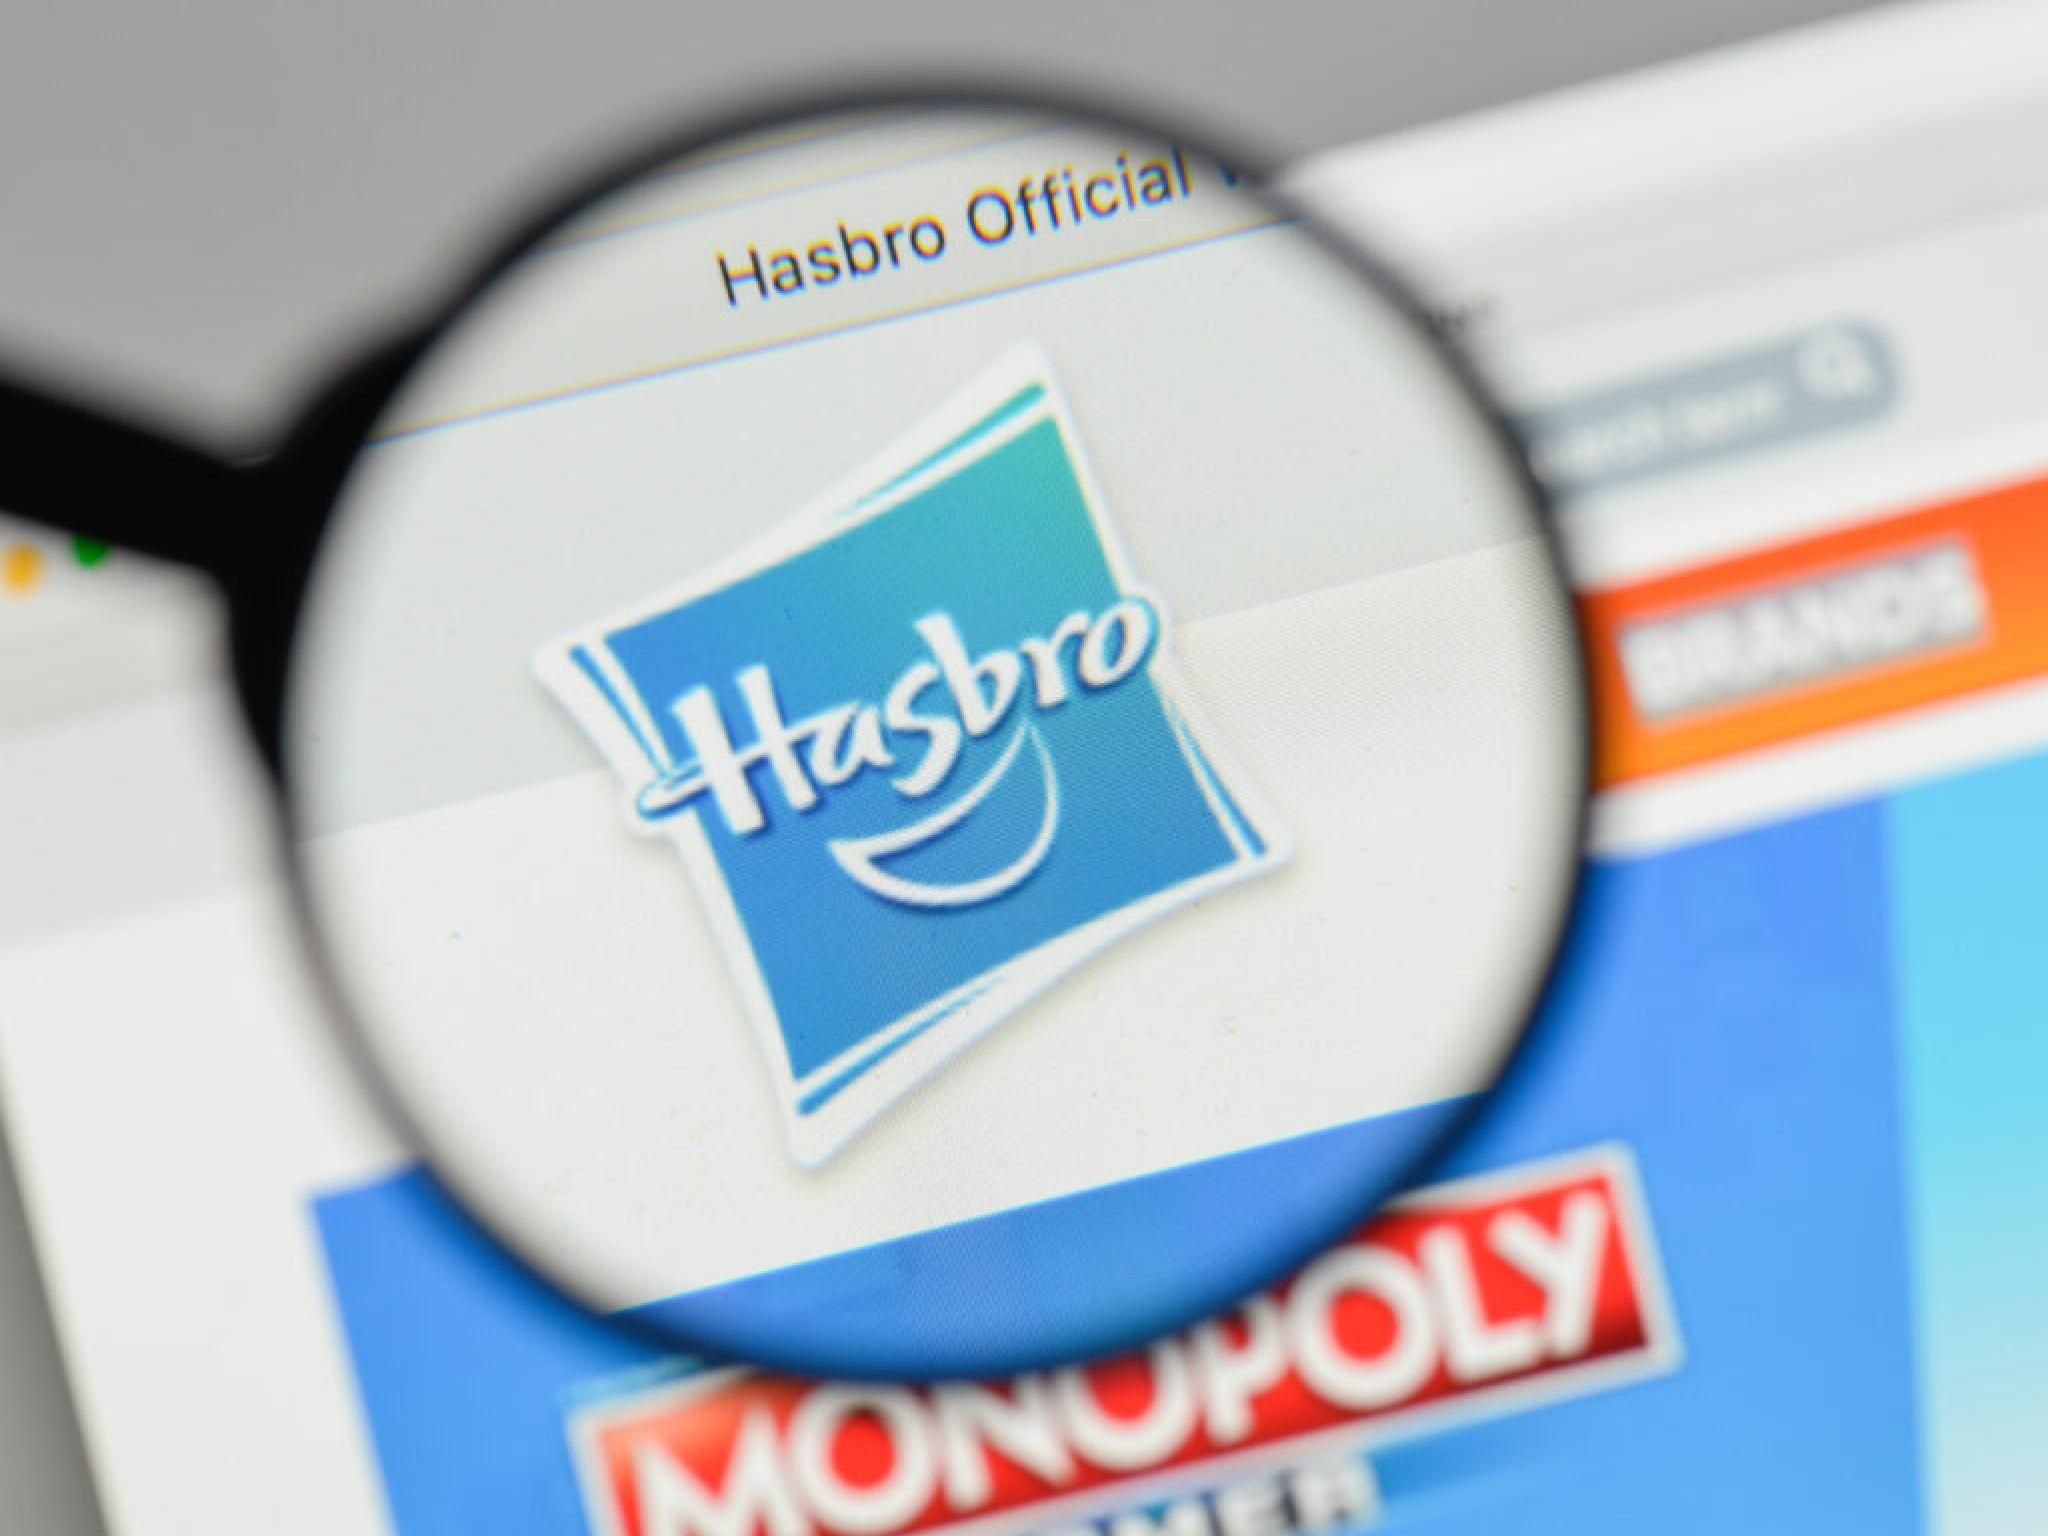  hasbro-to-rally-around-38-here-are-10-top-analyst-forecasts-for-friday 